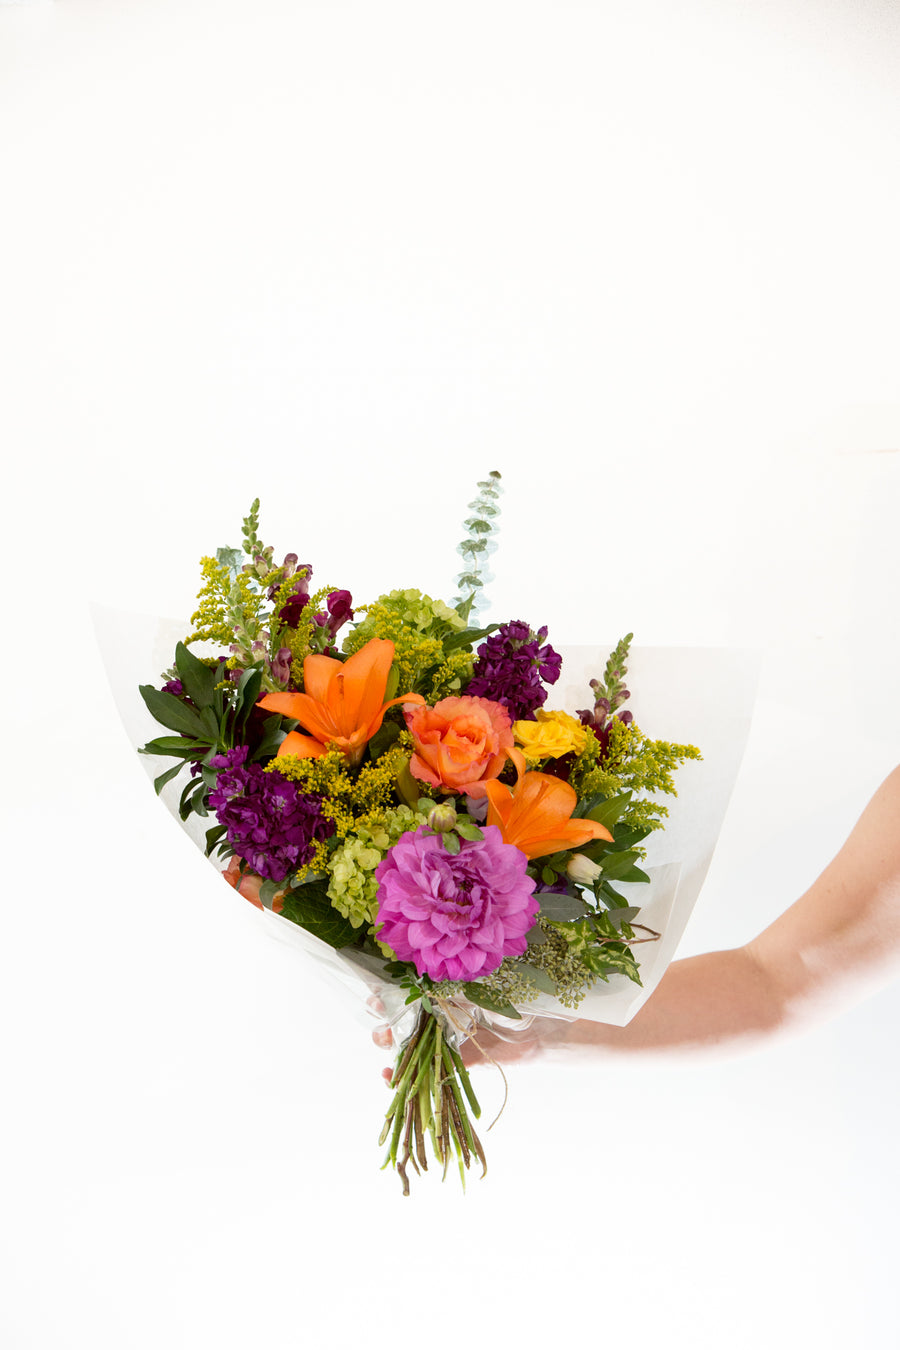 Bright and Colorful handed bouquet - medium $75